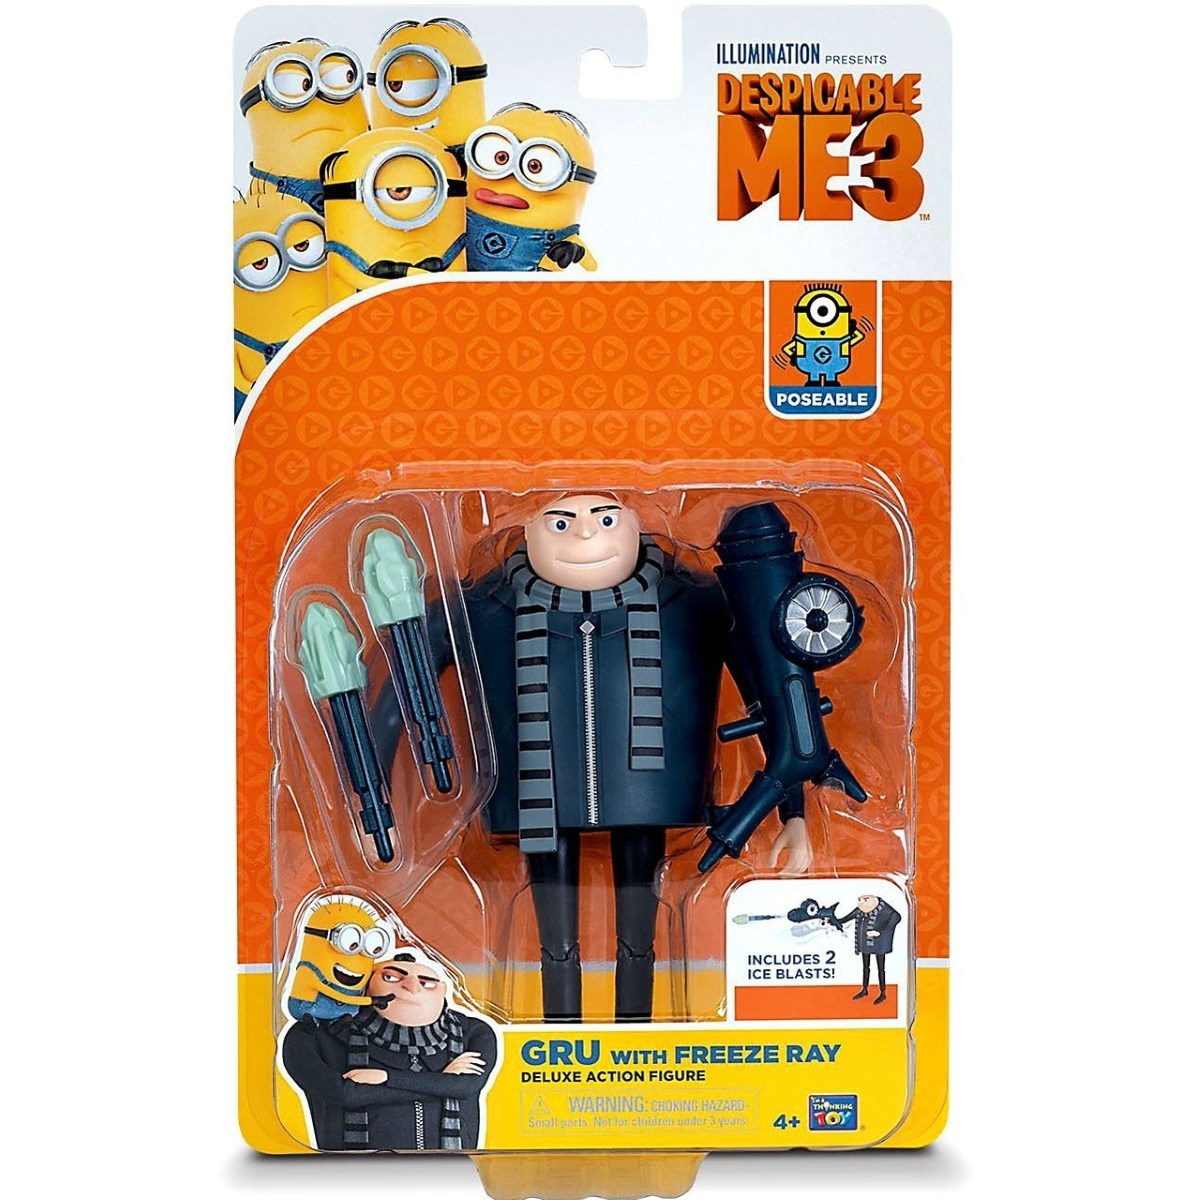 Despicable Me 3 Deluxe Action Figure Assorted Toys Casey S Toys